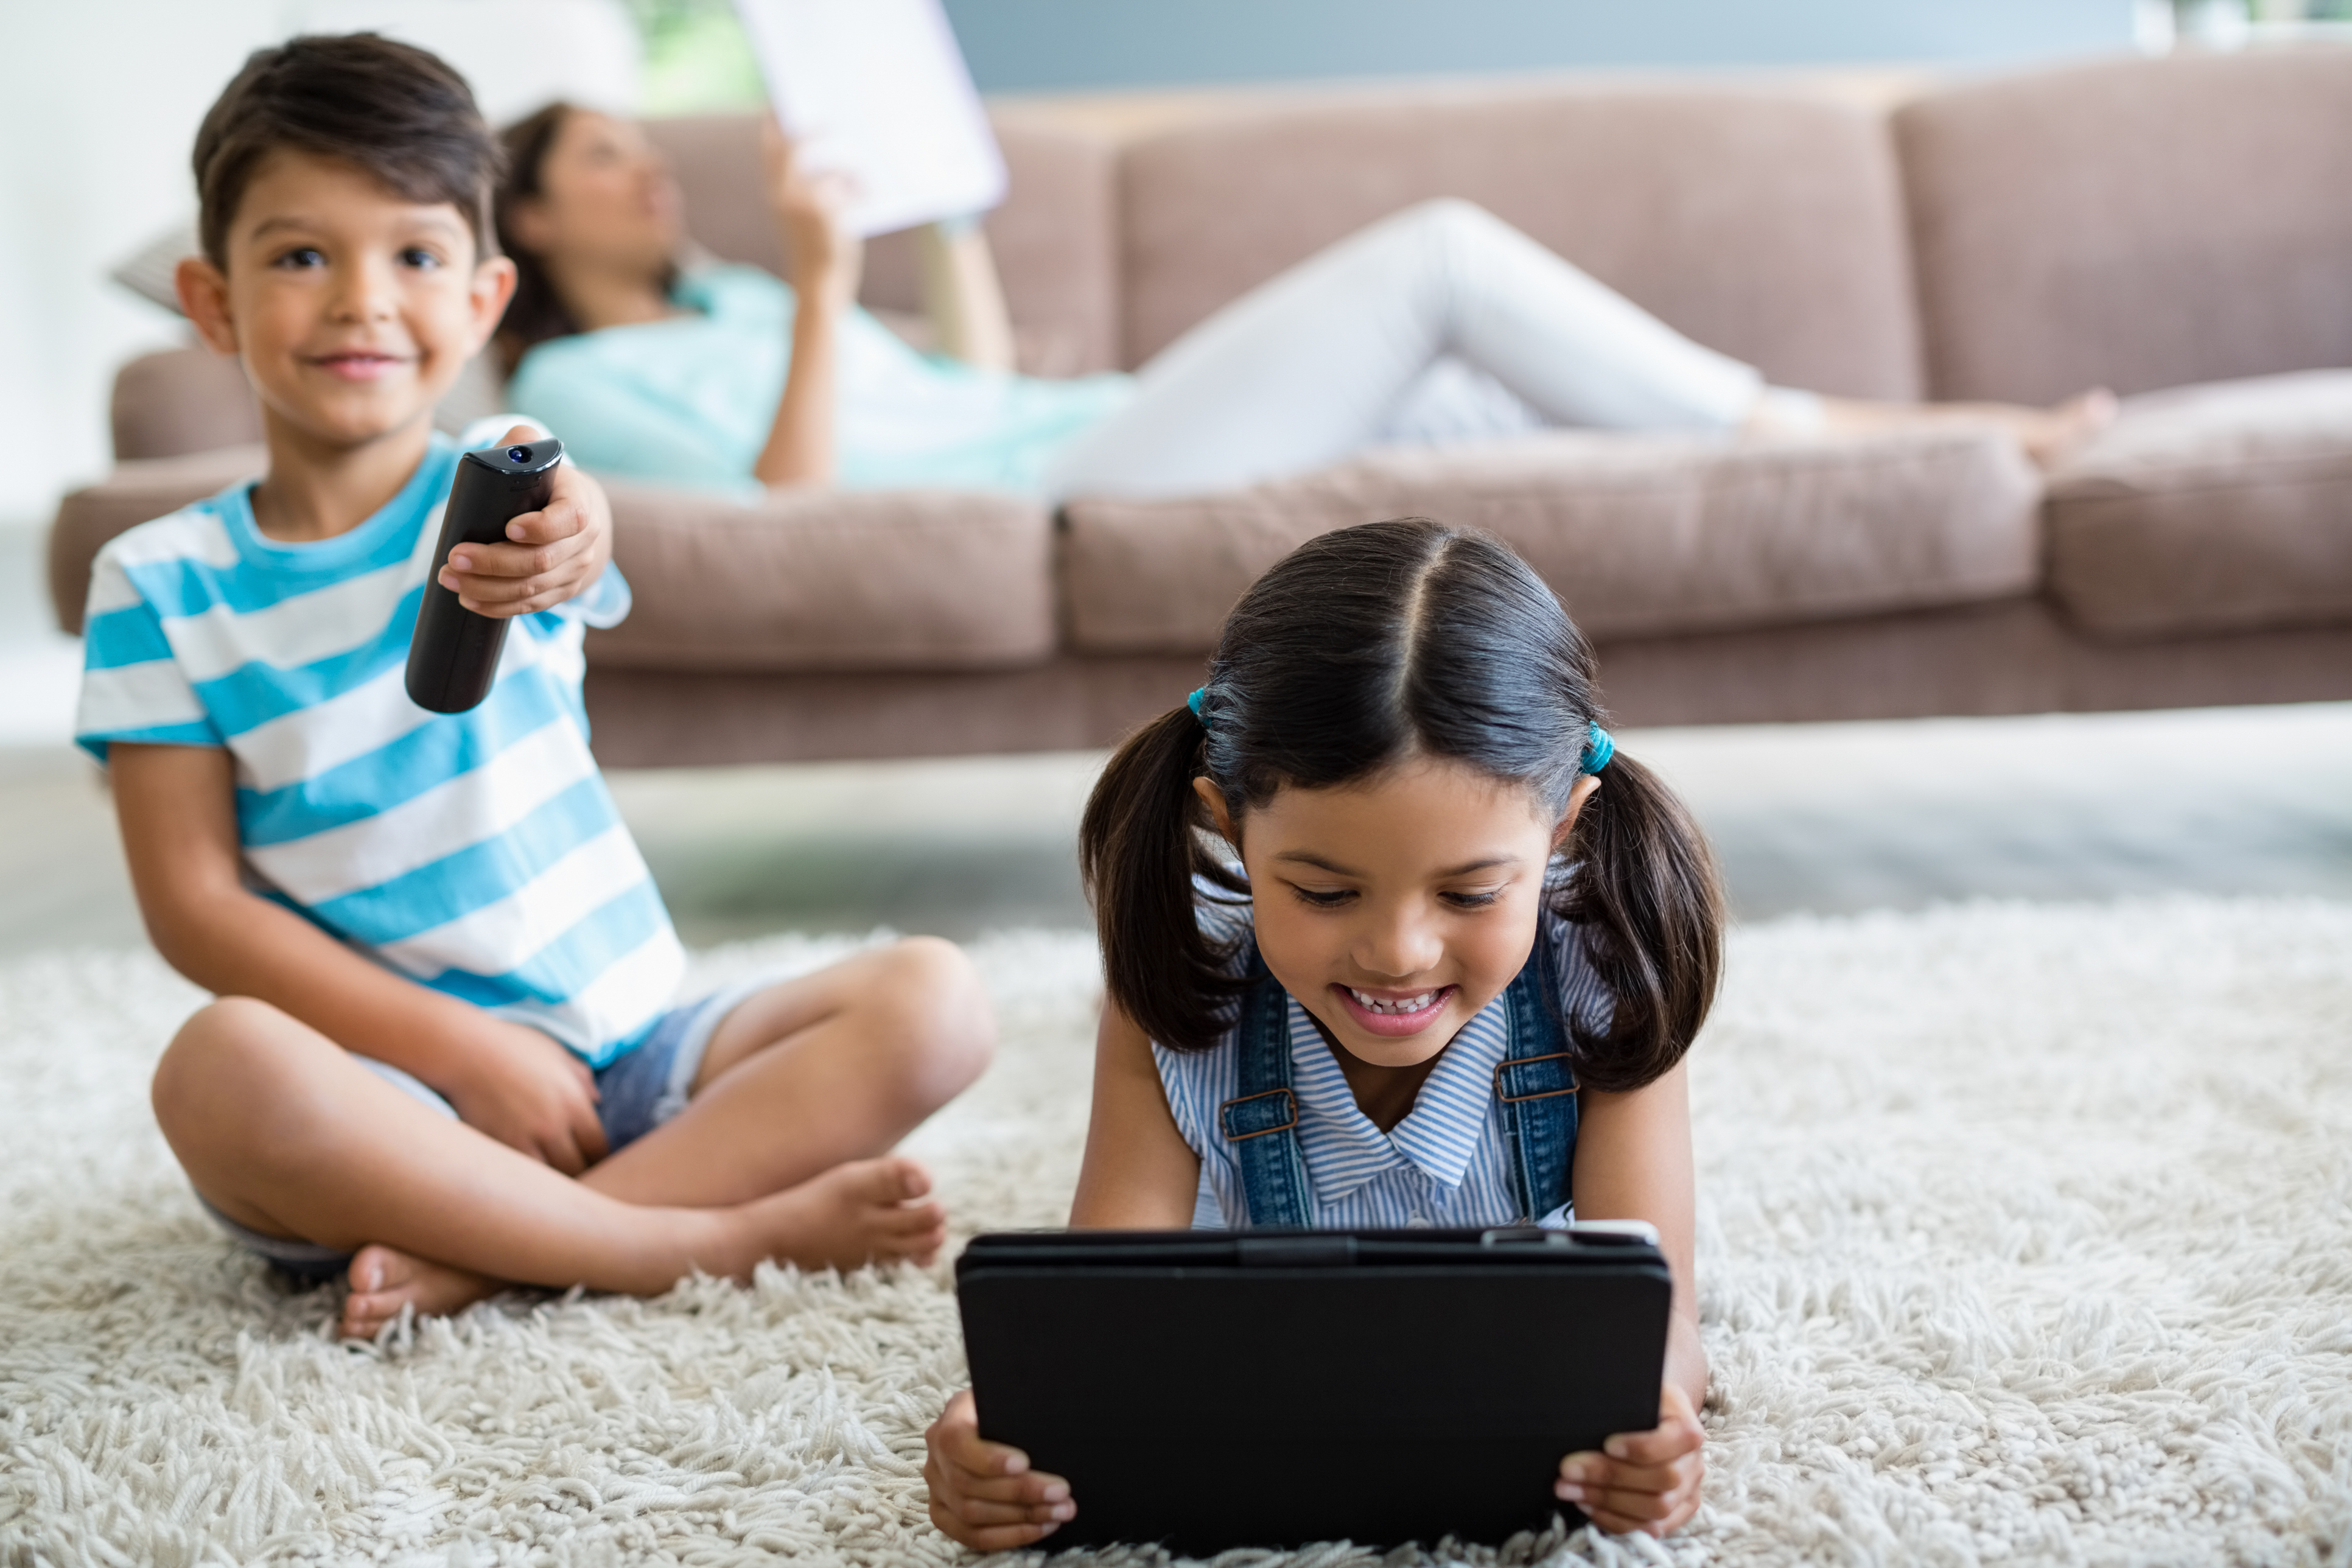 Image of a child holding a tv remote and another child holding an iPad - they are both sitting on the floor of their living room